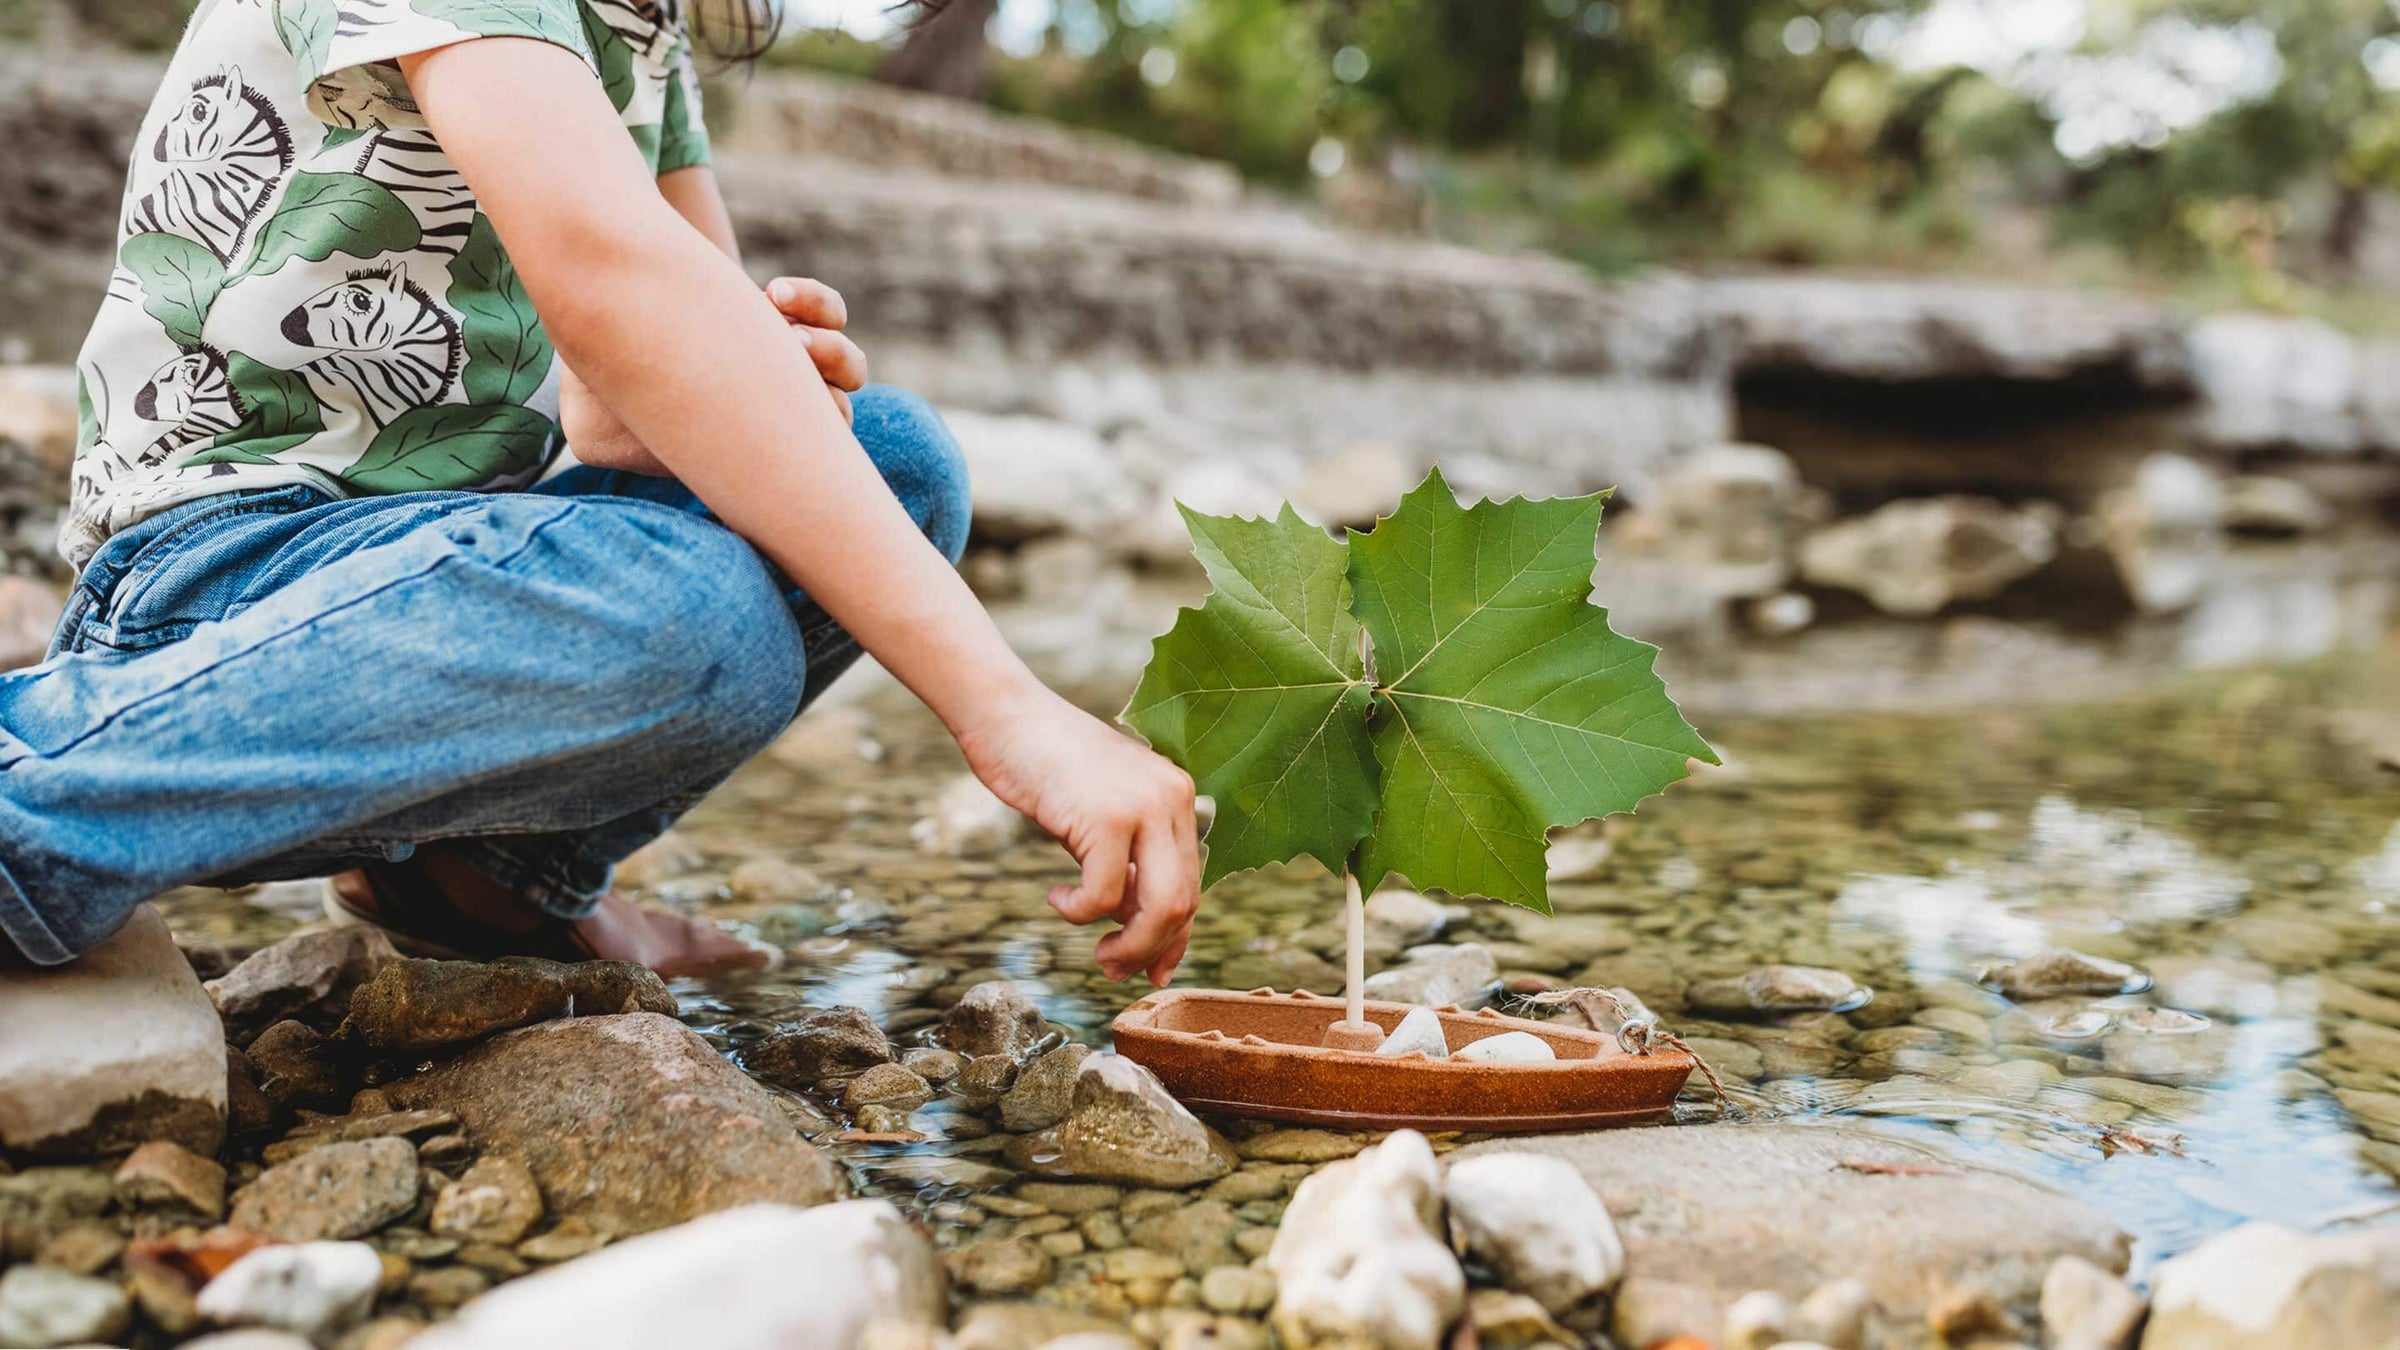 Child kneeling in stream with Cork Boat in the water with green leaf as the sail